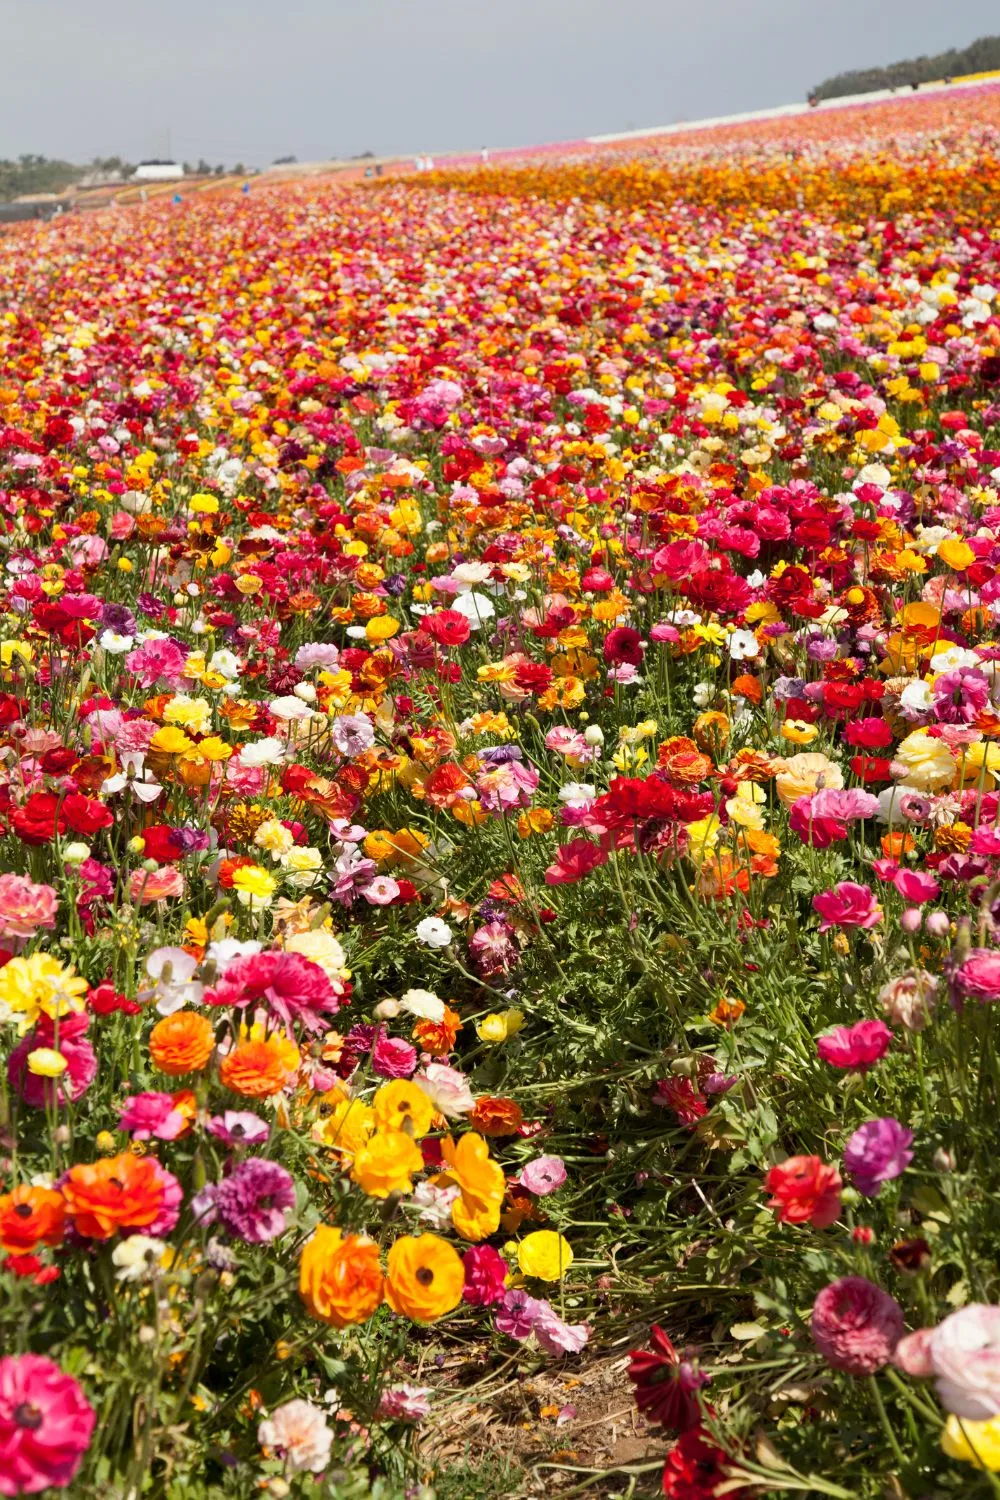 A field of ranunculus flowers at the Carlsbad Flower Fields.